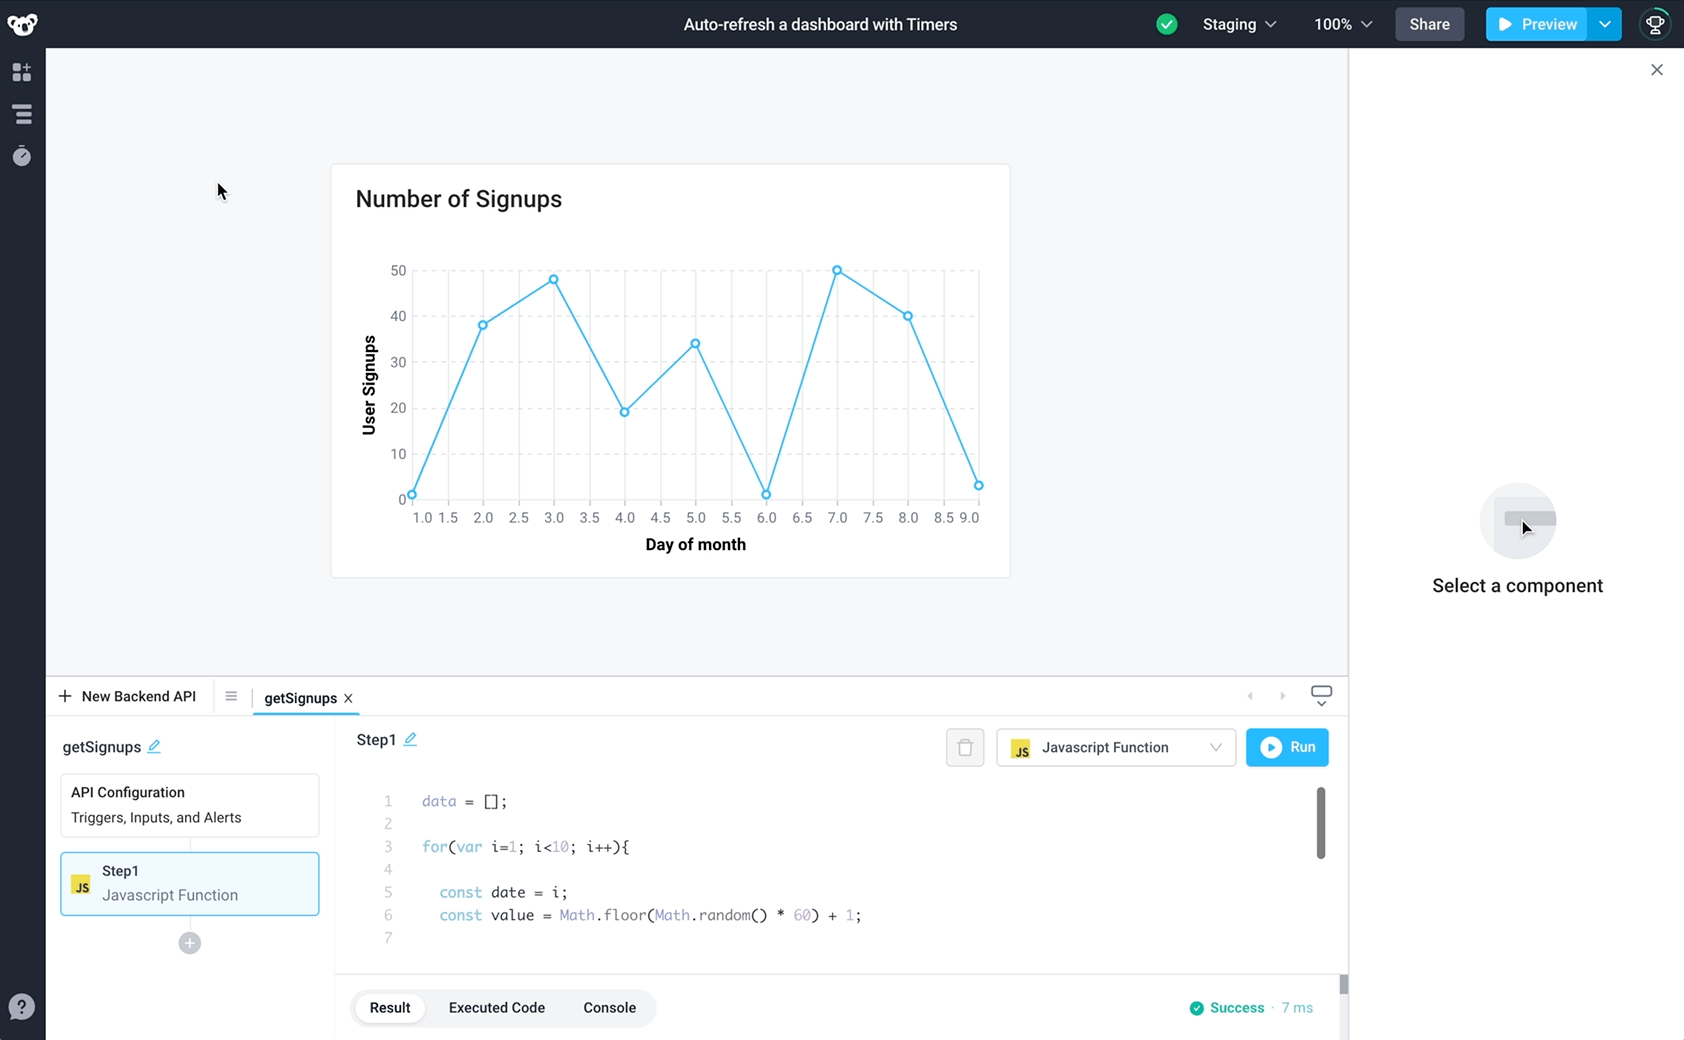 Timers collect new data and present them back to charts and tables in dashboards